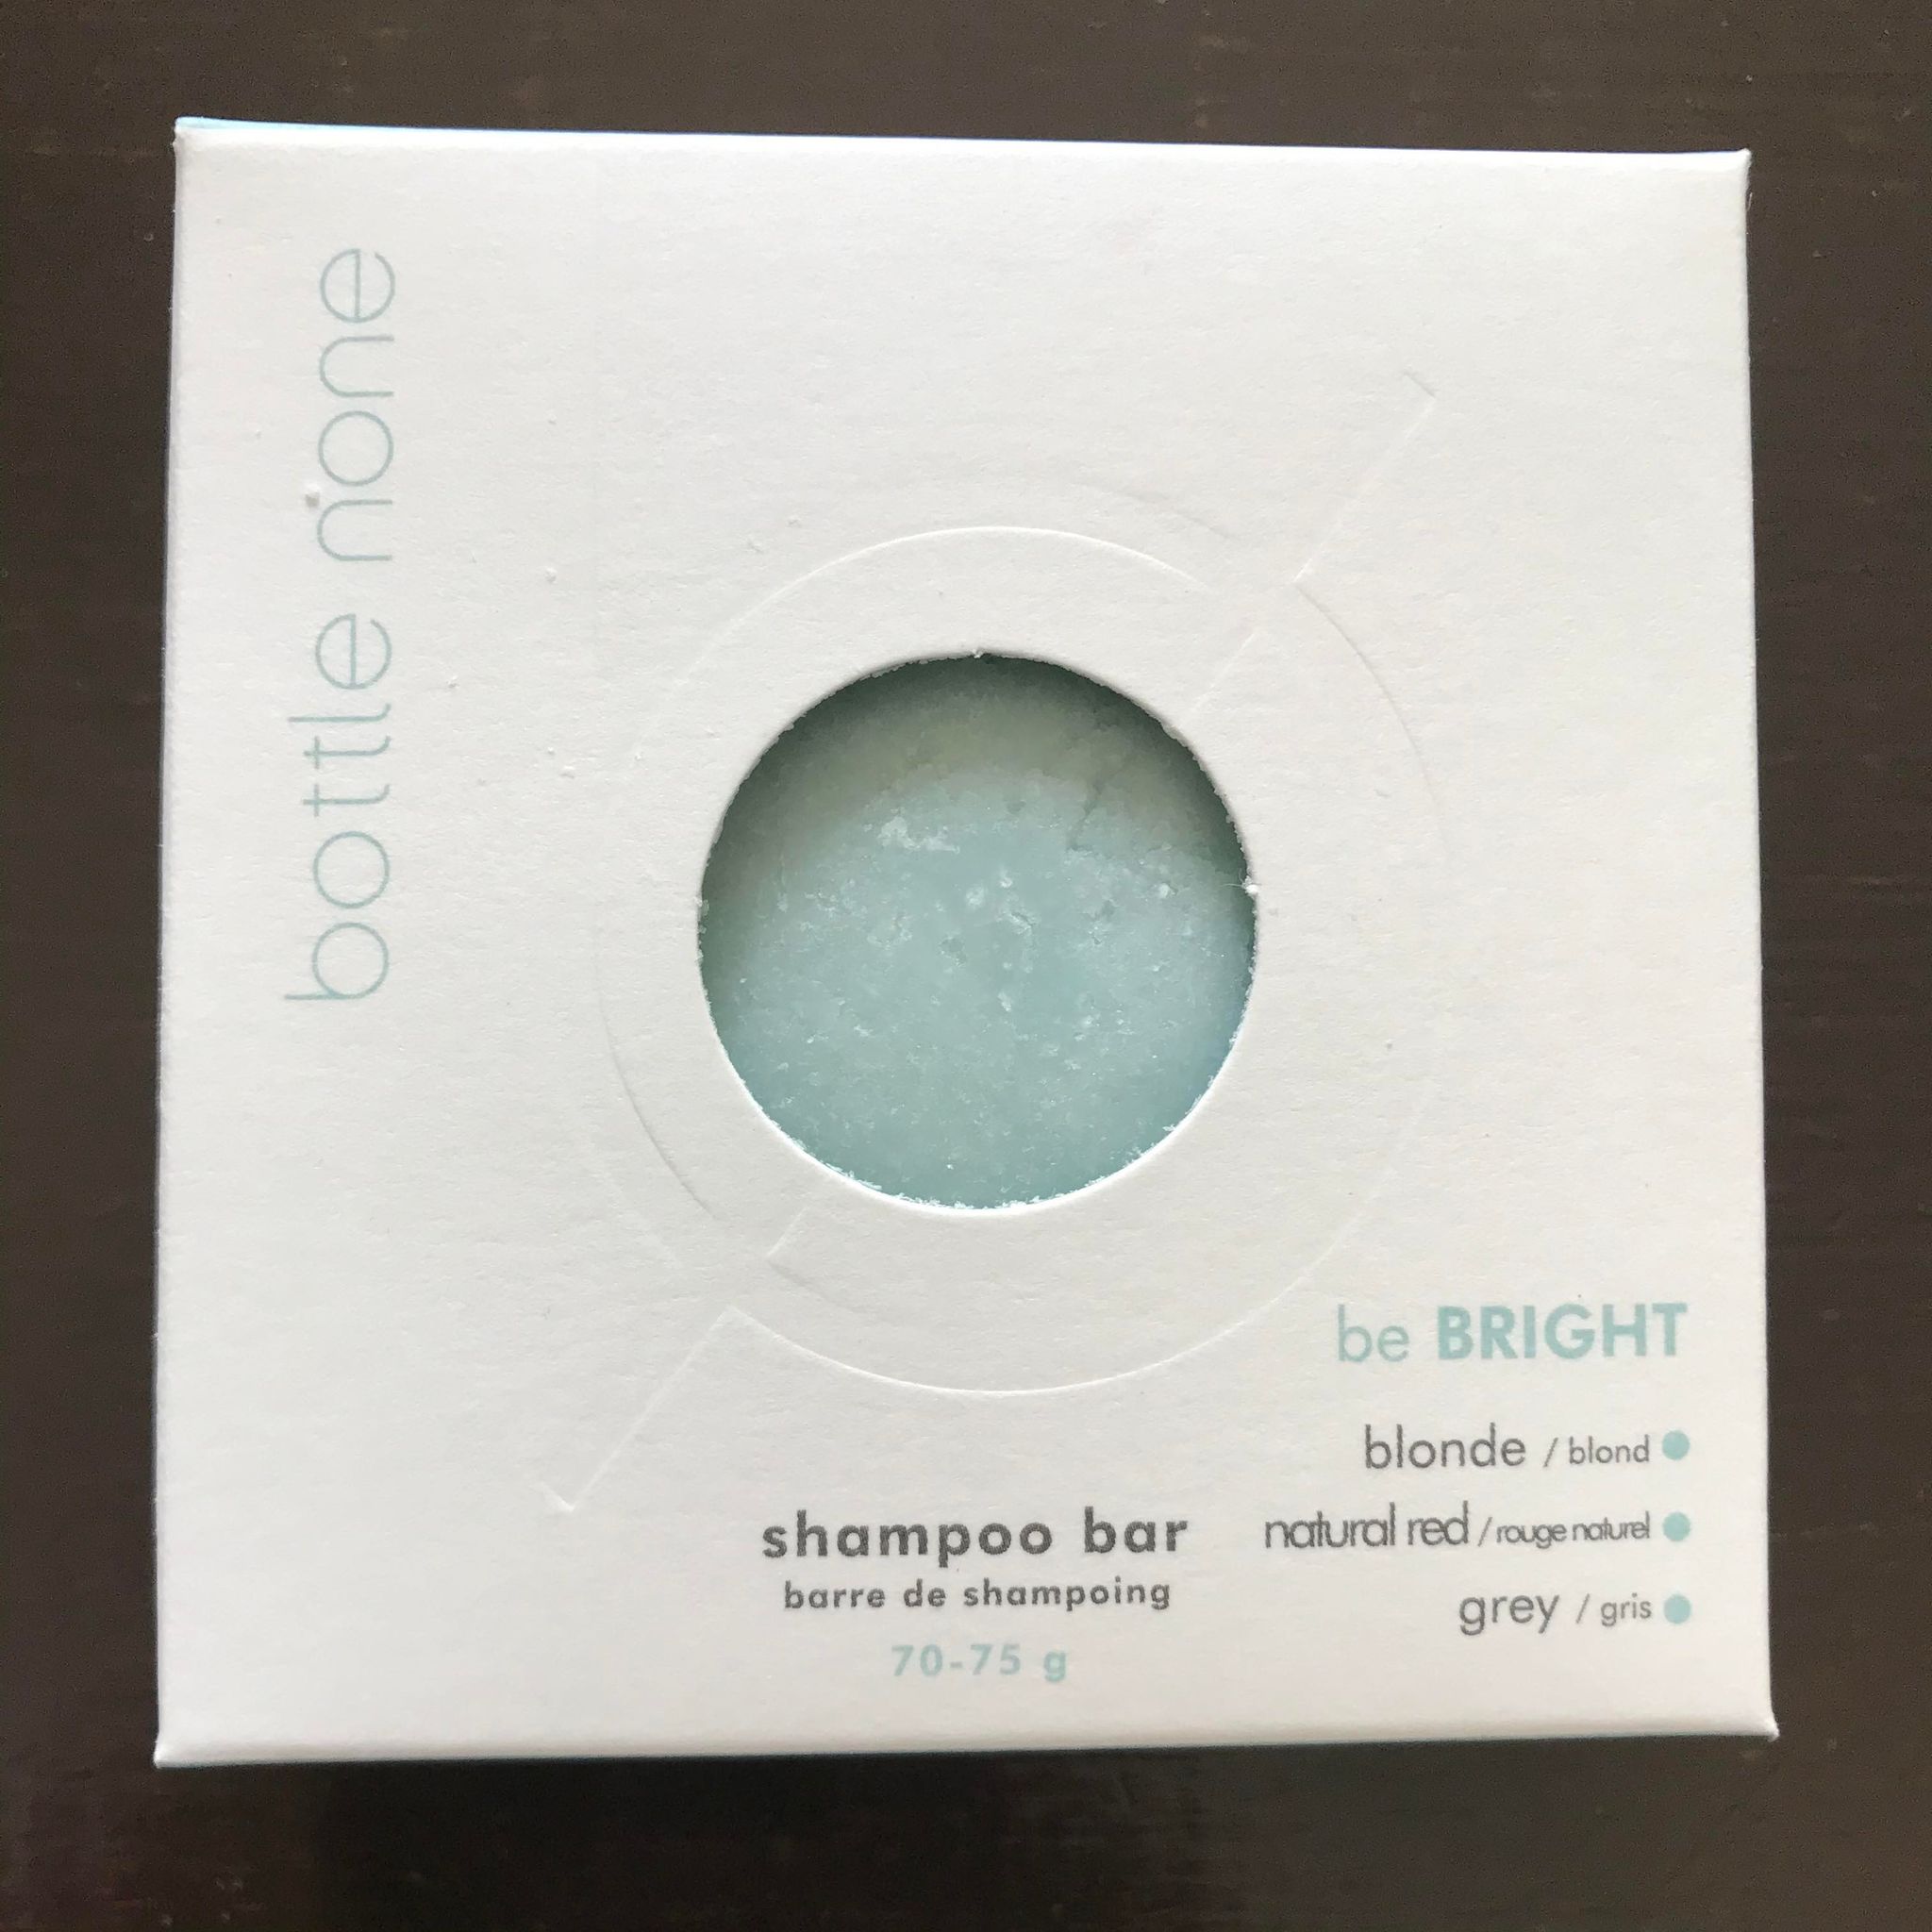 be bright bottle none shampoo bar in a zero waste box is ideal for blonde, natural red and grey hair